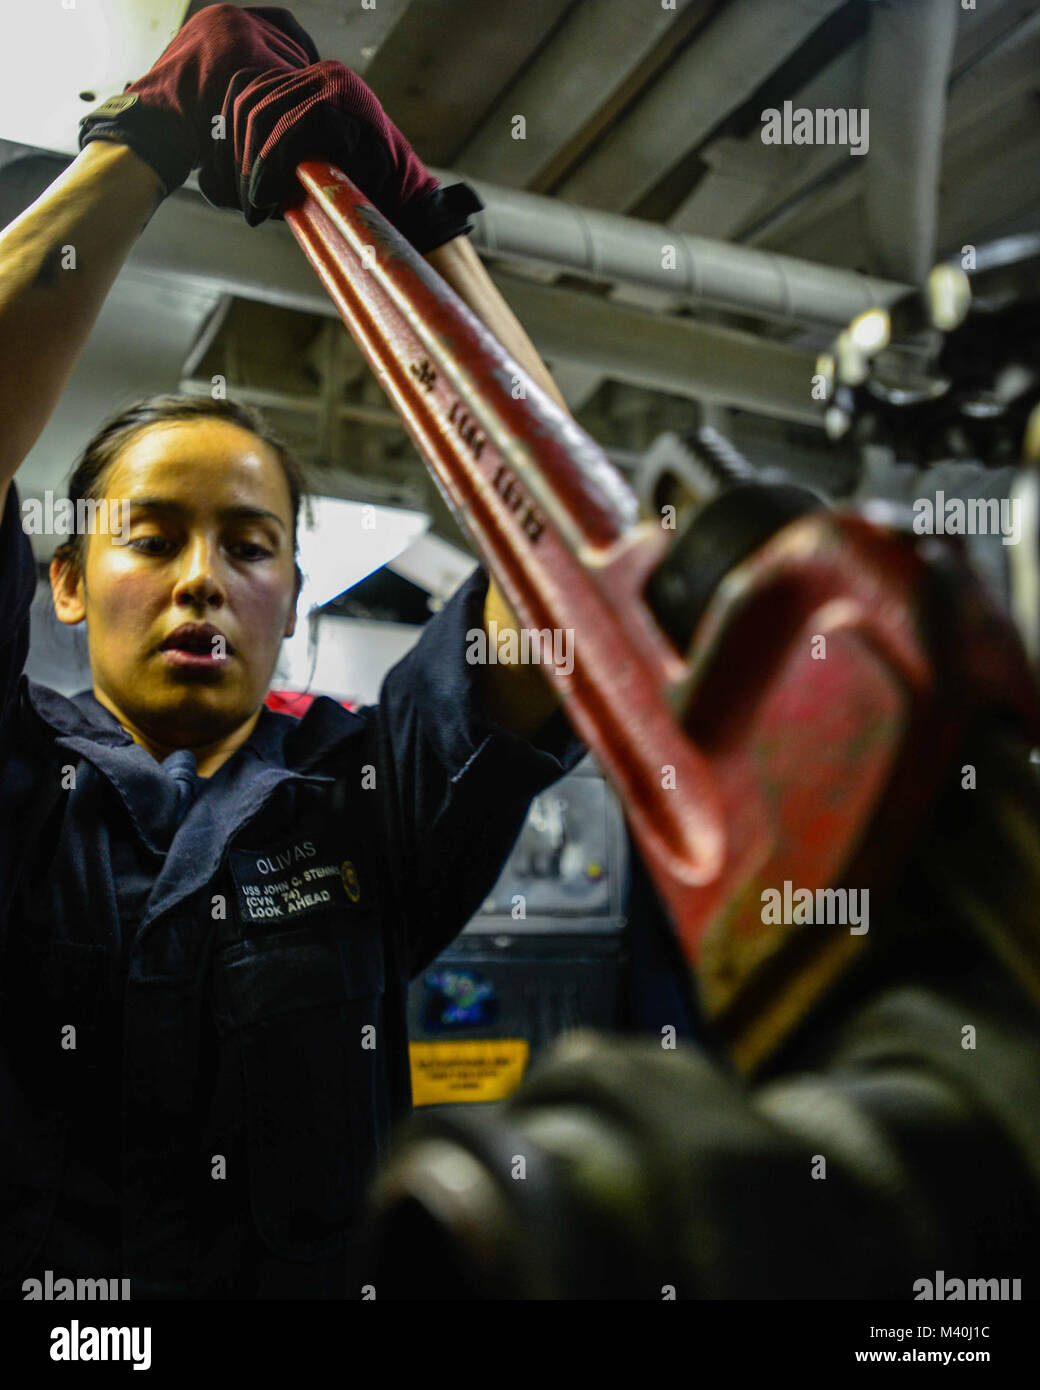 150420-N-TC437-128 PACIFIC OCEAN (April 20, 2015) - Machinist's Mate Fireman Veronica Olivas, from Pueblo, Colo., loosens a coupling on a steam valve aboard USS John C. Stennis (CVN 74). Stennis is undergoing Tailored Ship's Training Availability and Final Evaluation Problem, assessing its abilities to conduct combat missions, support functions and survive complex casualty control situations. (U.S. Navy Photo by Mass Communication Specialist 3rd Class Ignacio D. Perez/ Released) 150420-N-TC437-128 by USS John C. Stennis (CVN 74) Official Stock Photo